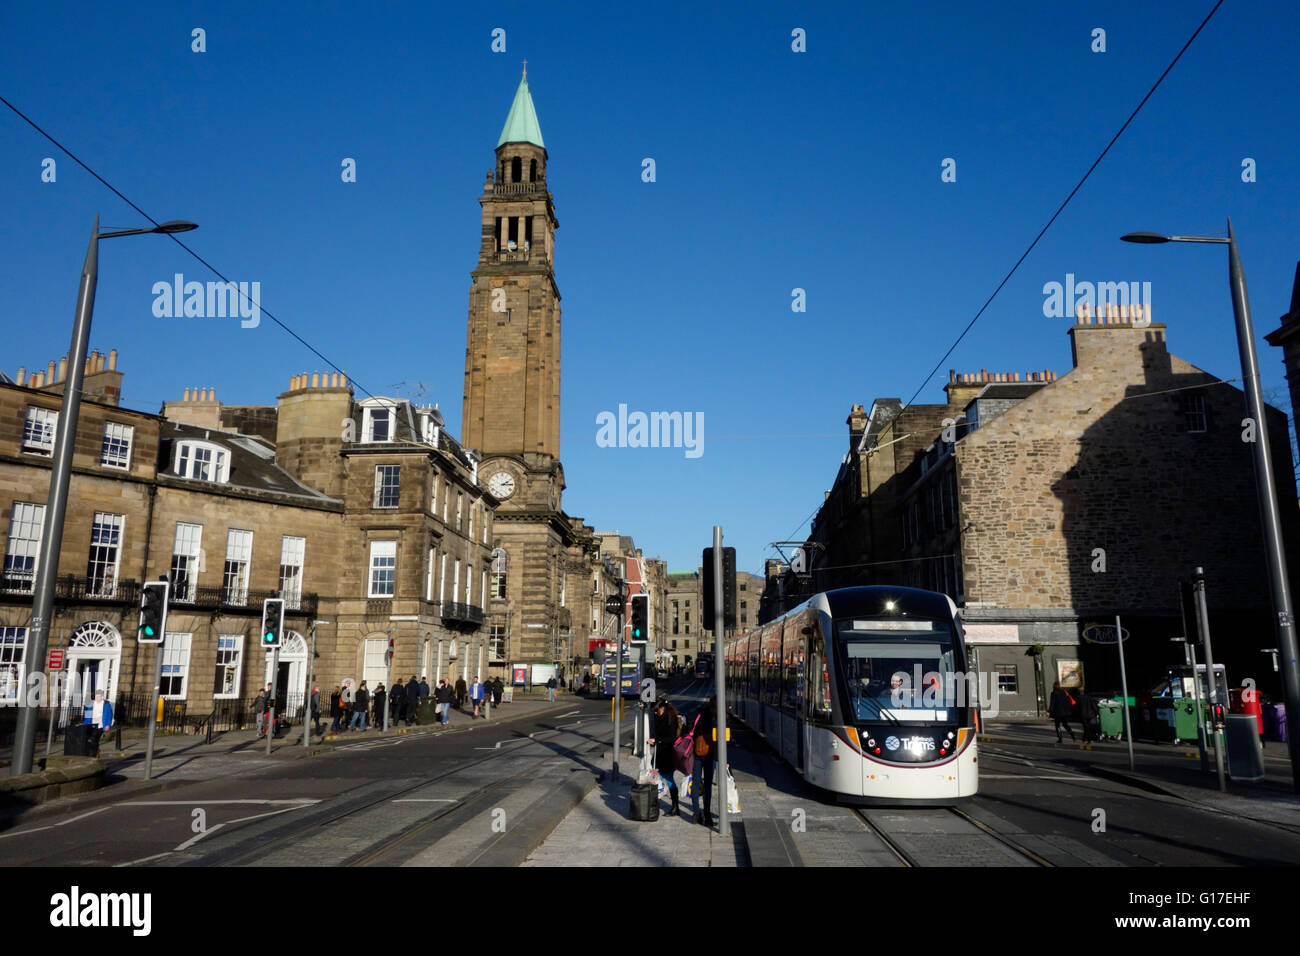 The West End - Princes Street tram stop Stock Photo